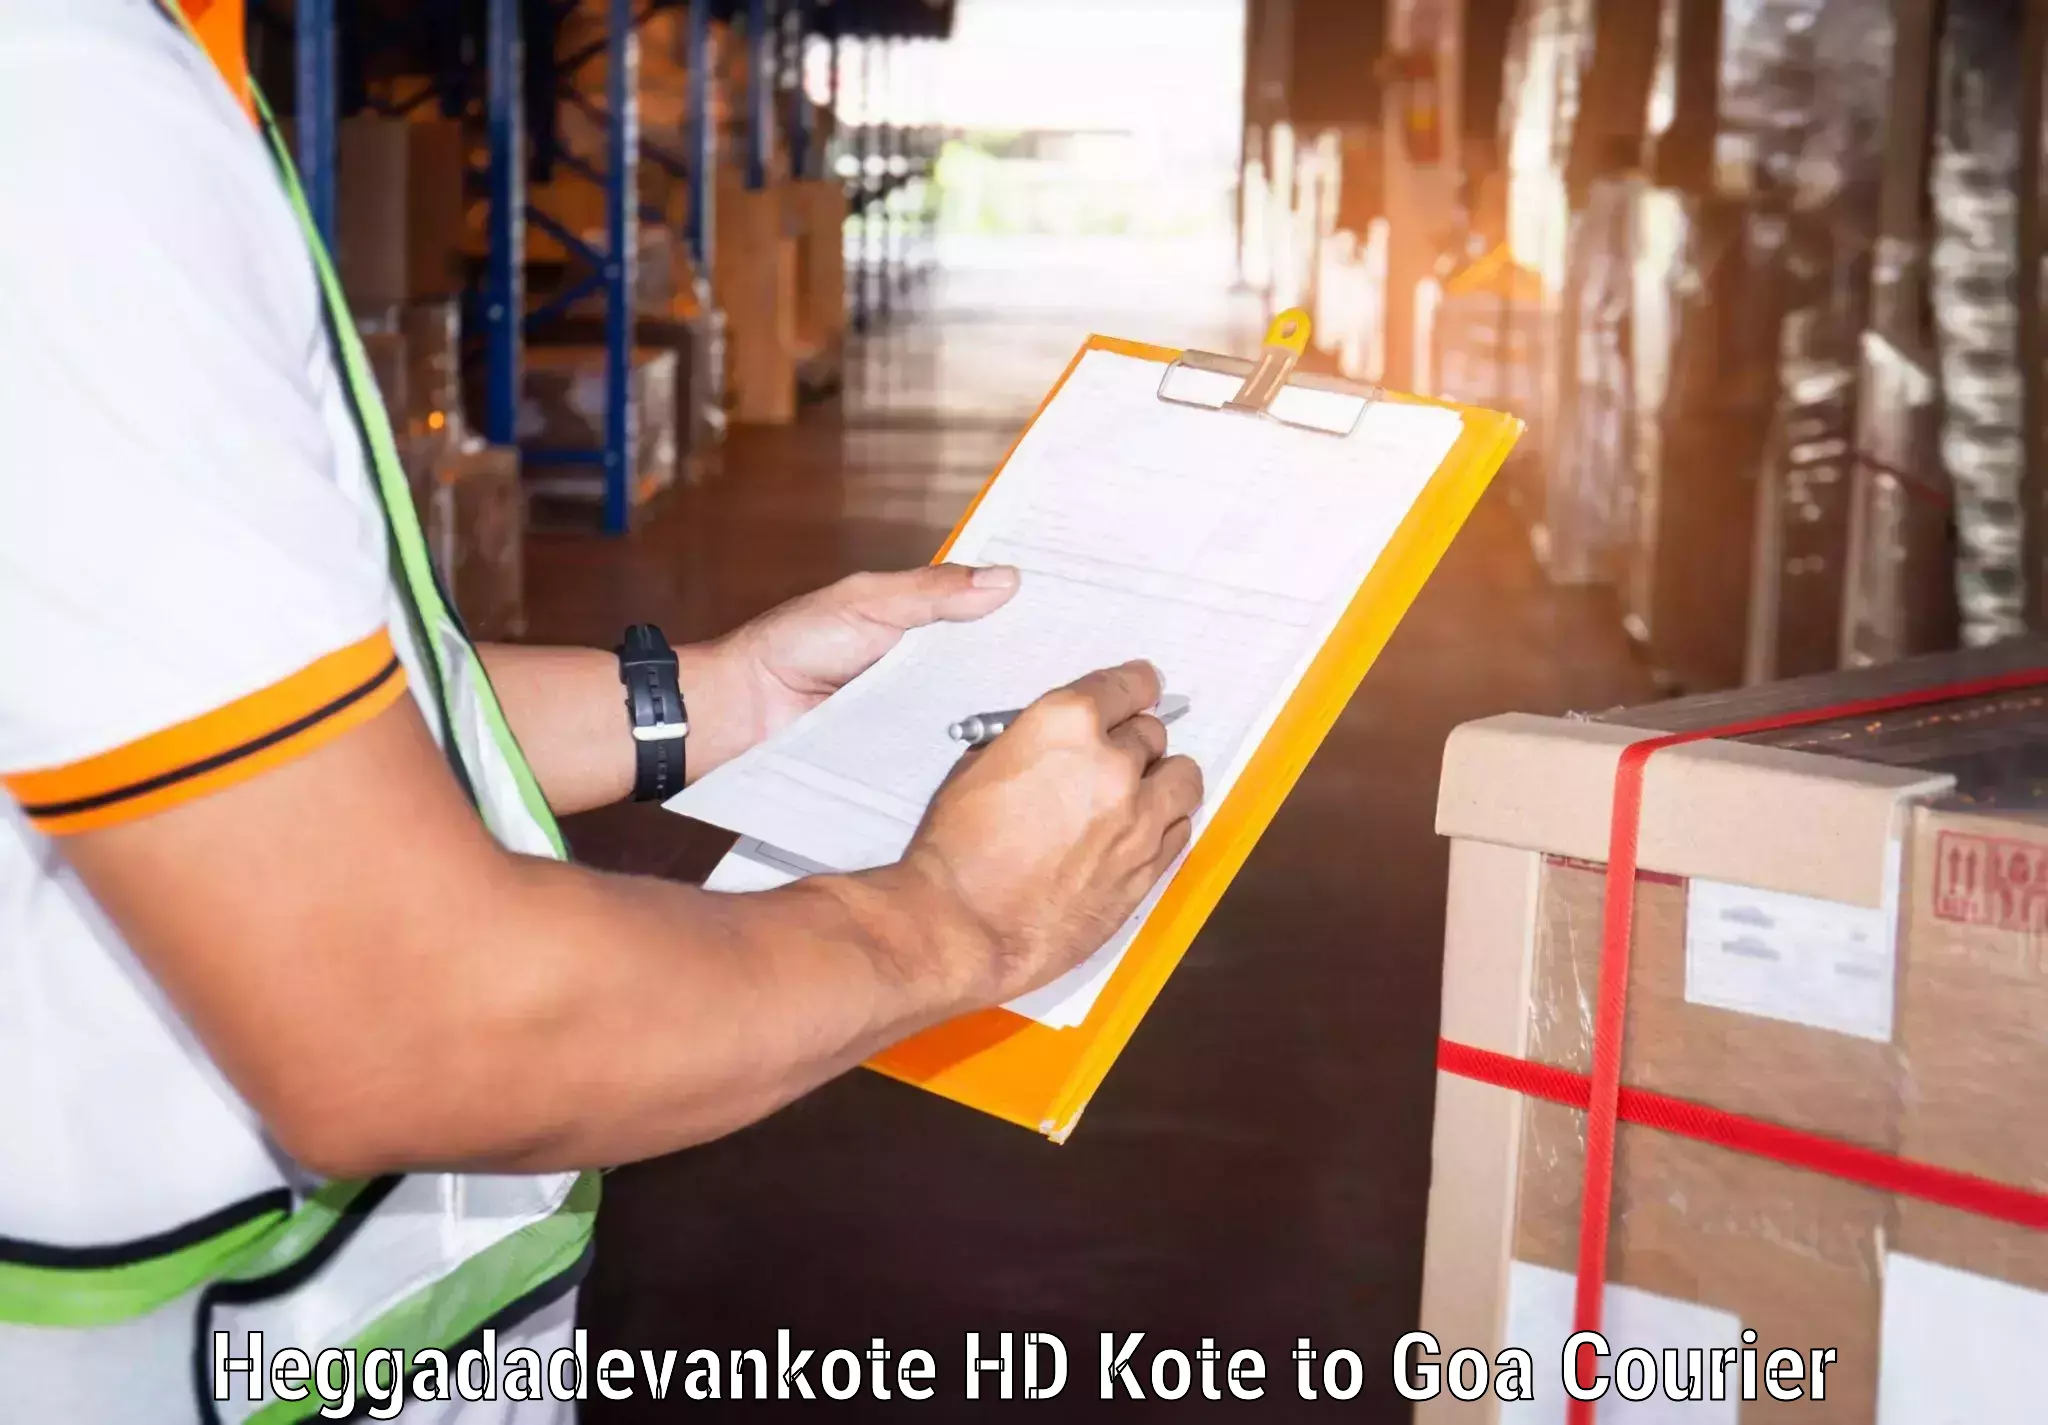 Cost-effective courier solutions Heggadadevankote HD Kote to Mormugao Port